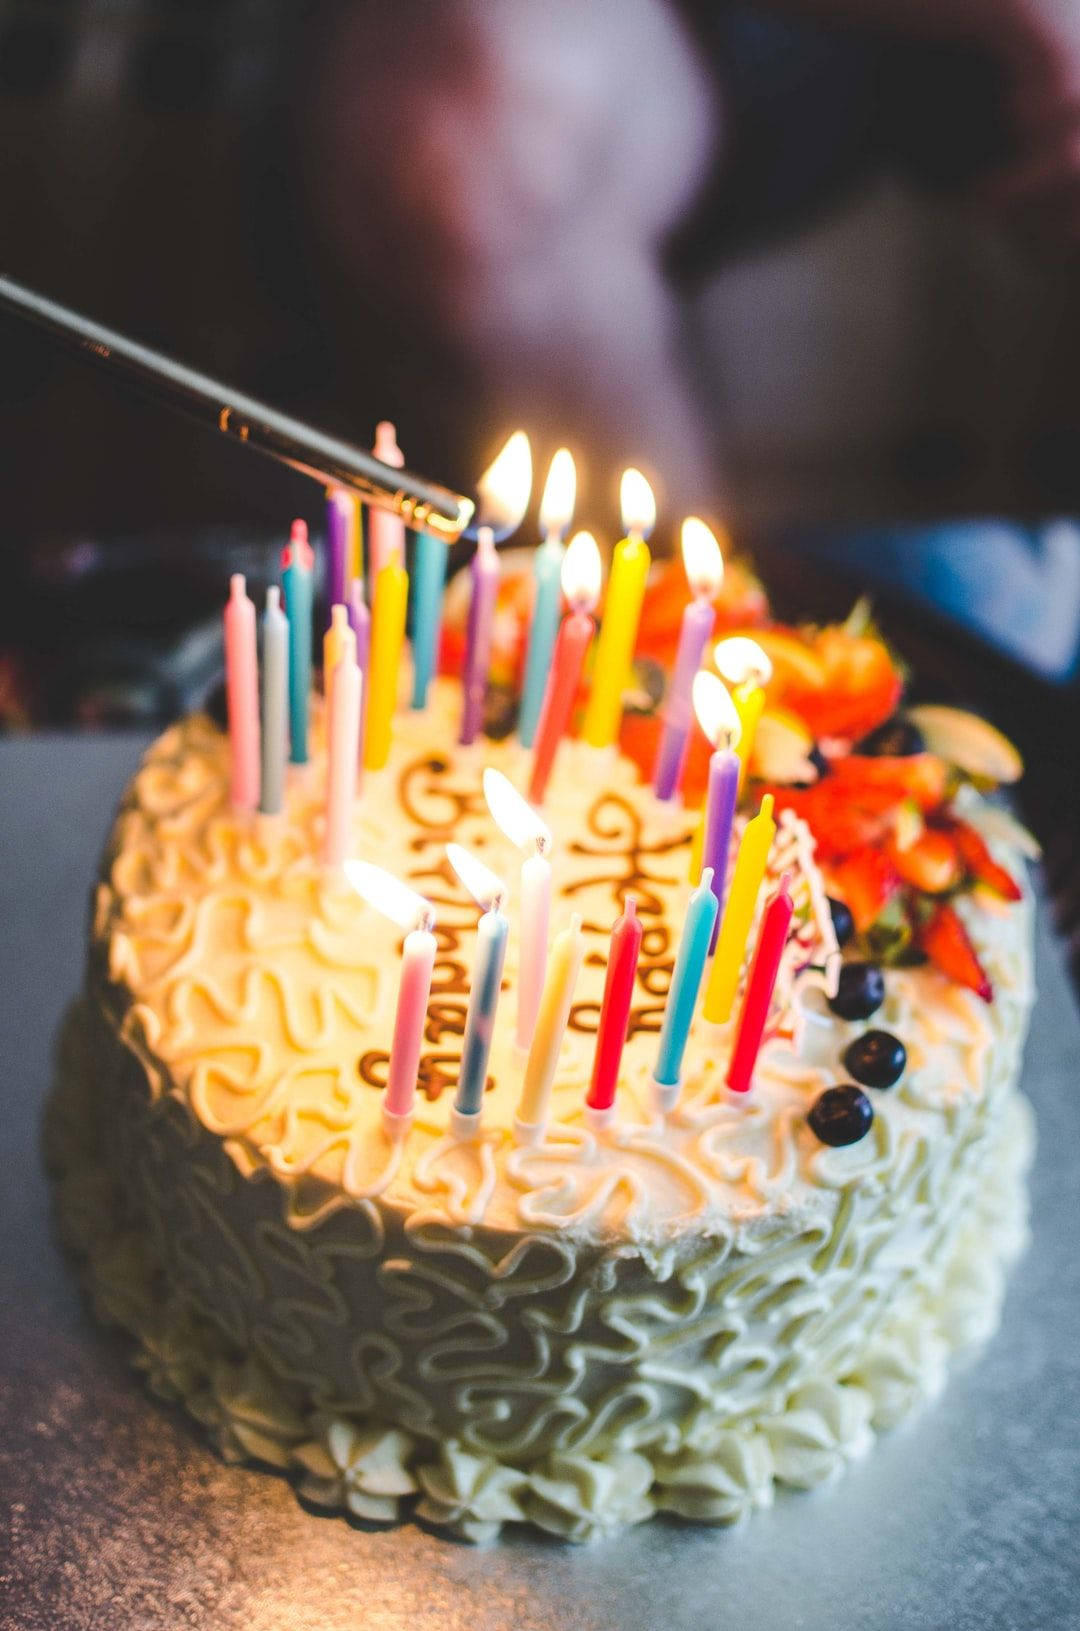 Birthday Cake With Multiple Lit Candles Background